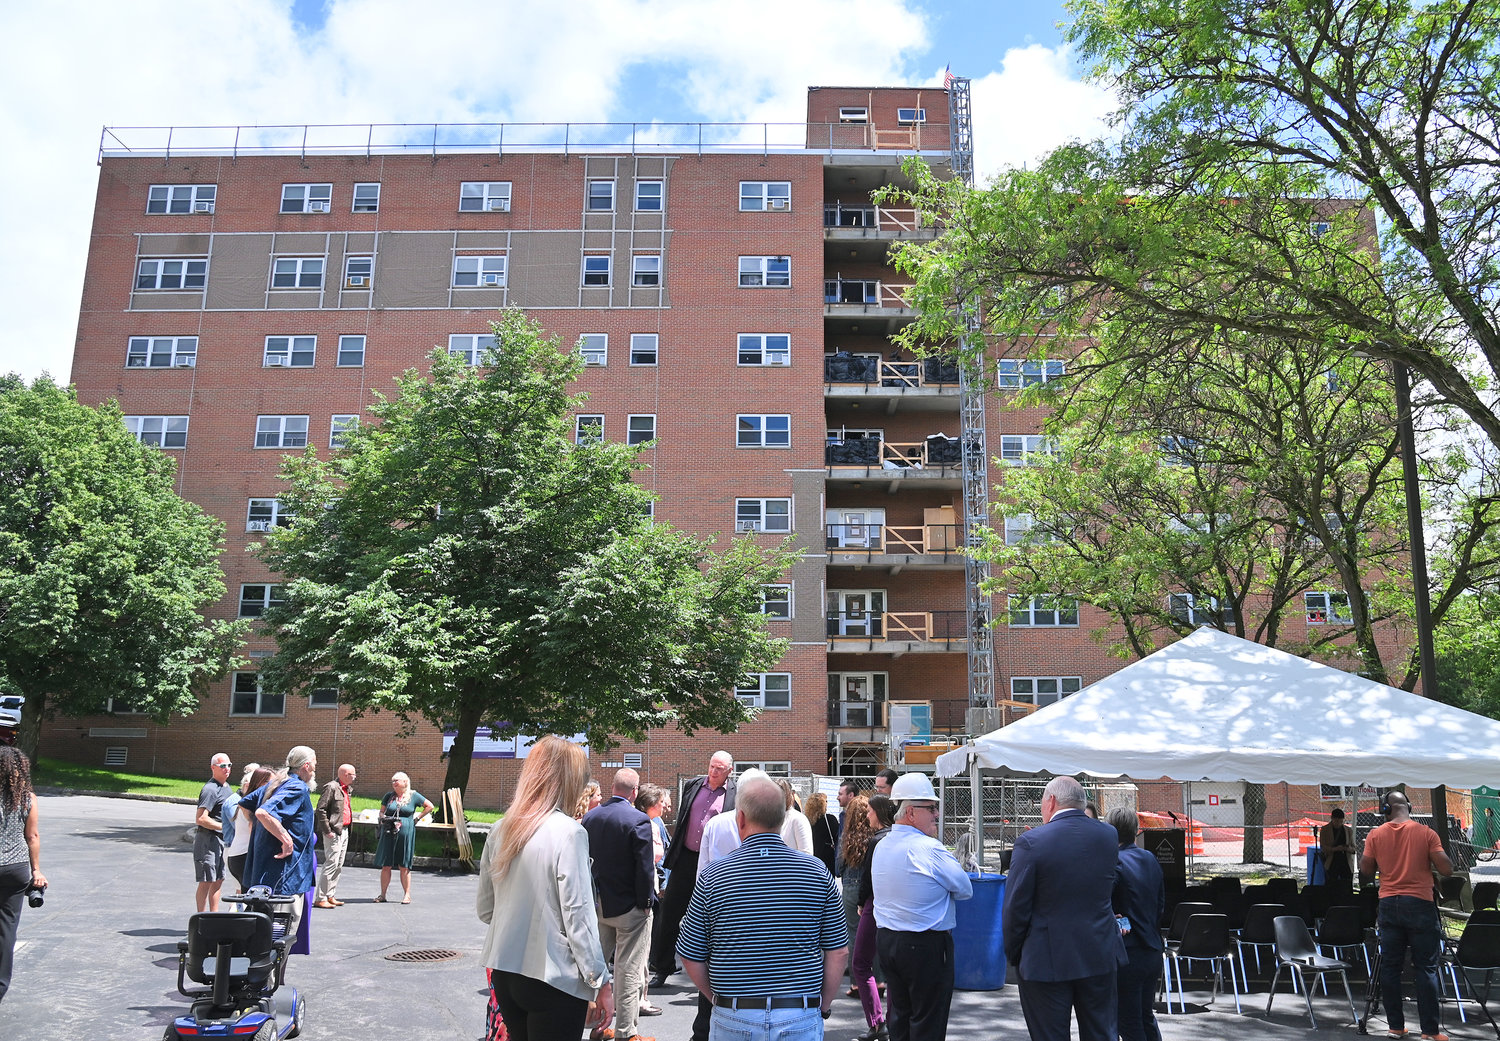 Local and state officials gather for a press conference and ground breaking ceremony for Colonial II Apartments, on Cottage Street, in Rome, which will become the state’s first carbon-neutral public housing building.